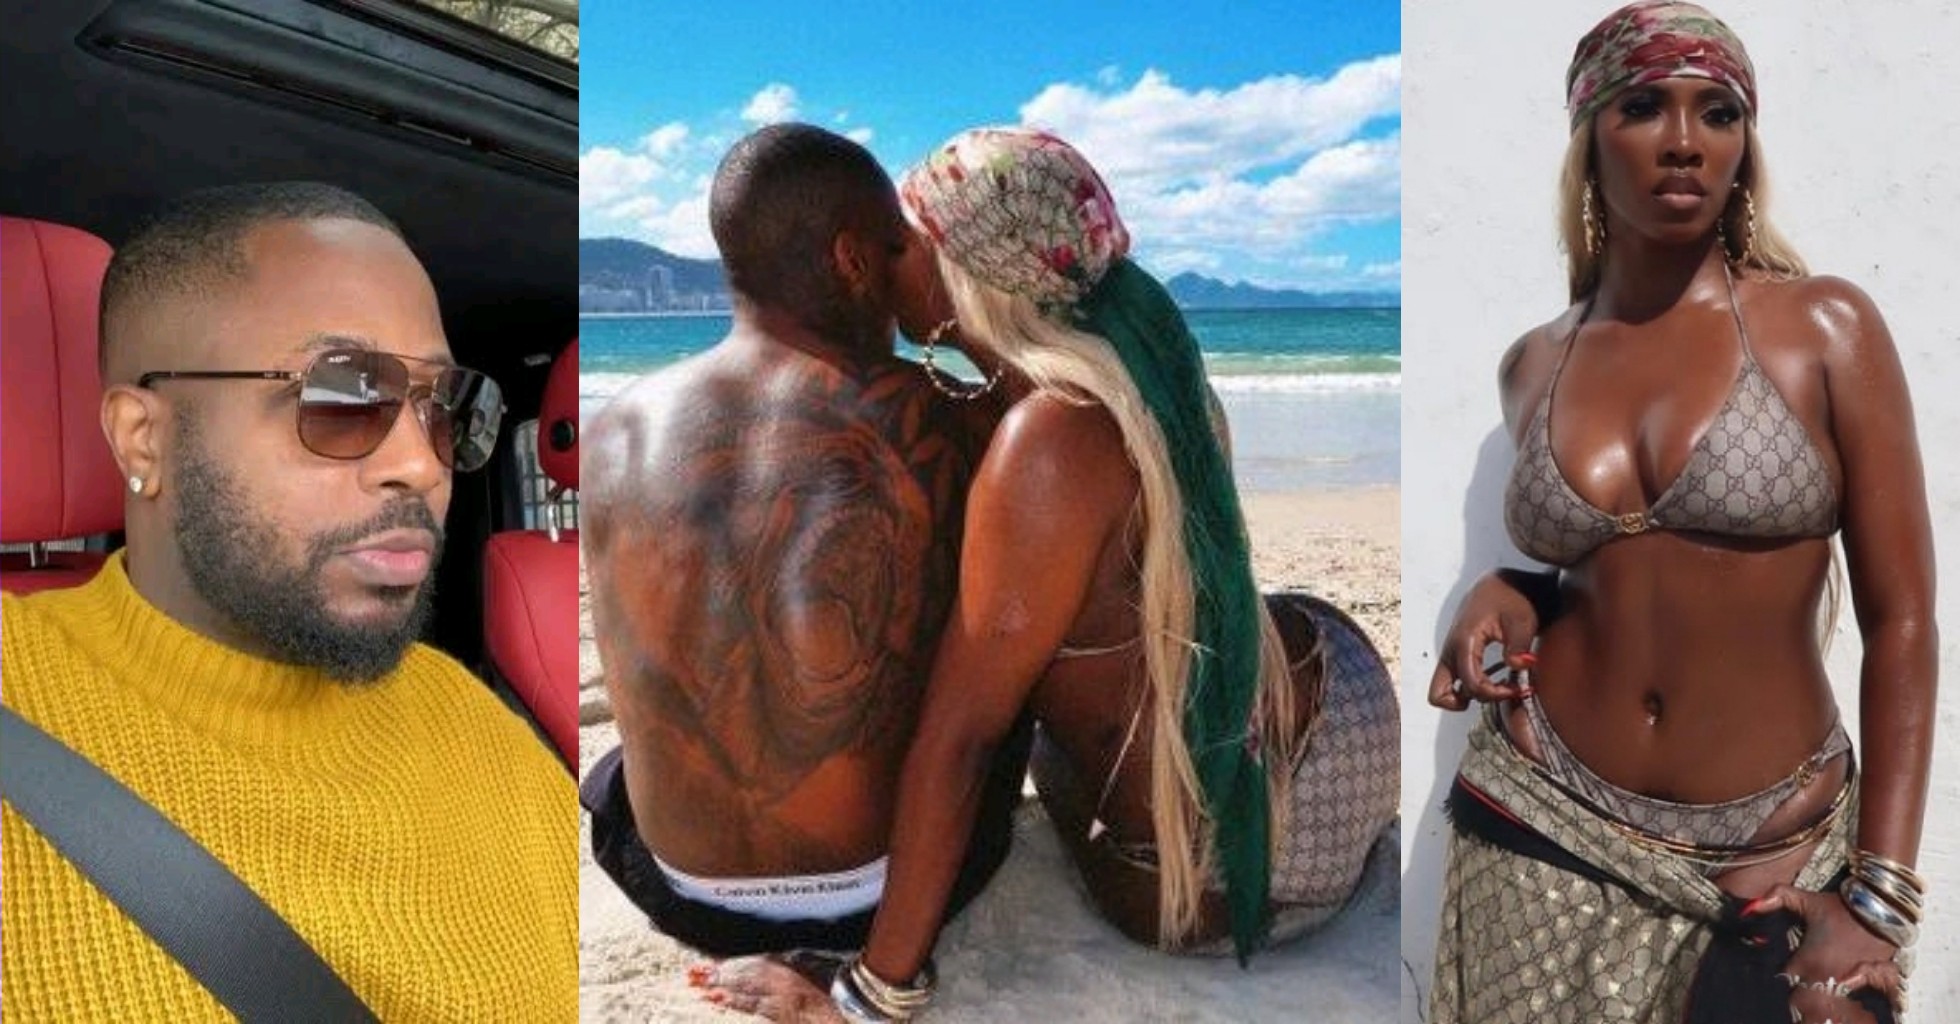 Tiwa Savage reacts to Tunde Ednut’s comment on her loved-up pic with Mystery man in Brazil amid dating rumors